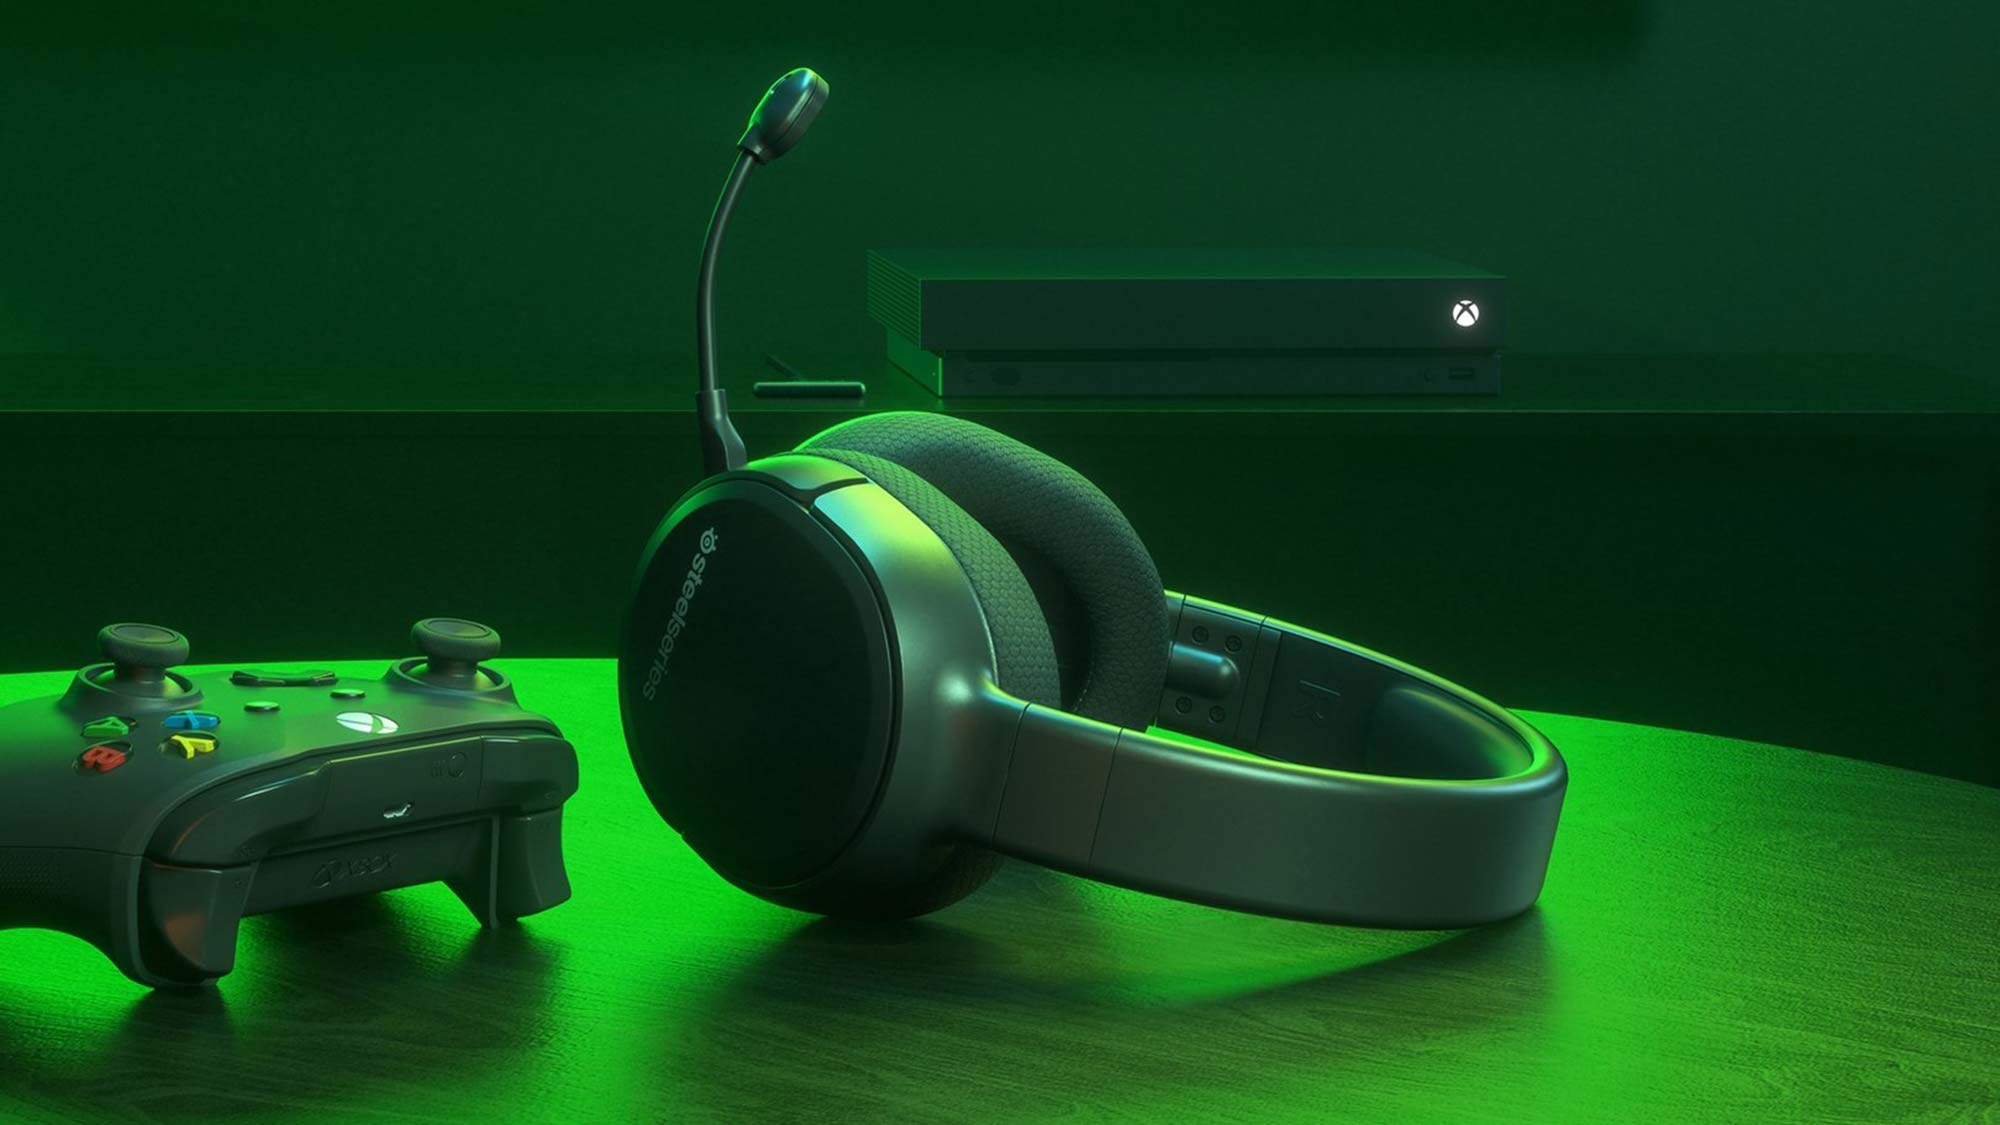 Best Xbox headsets: SteelSeries Arctis 1 Wireless for Xbox